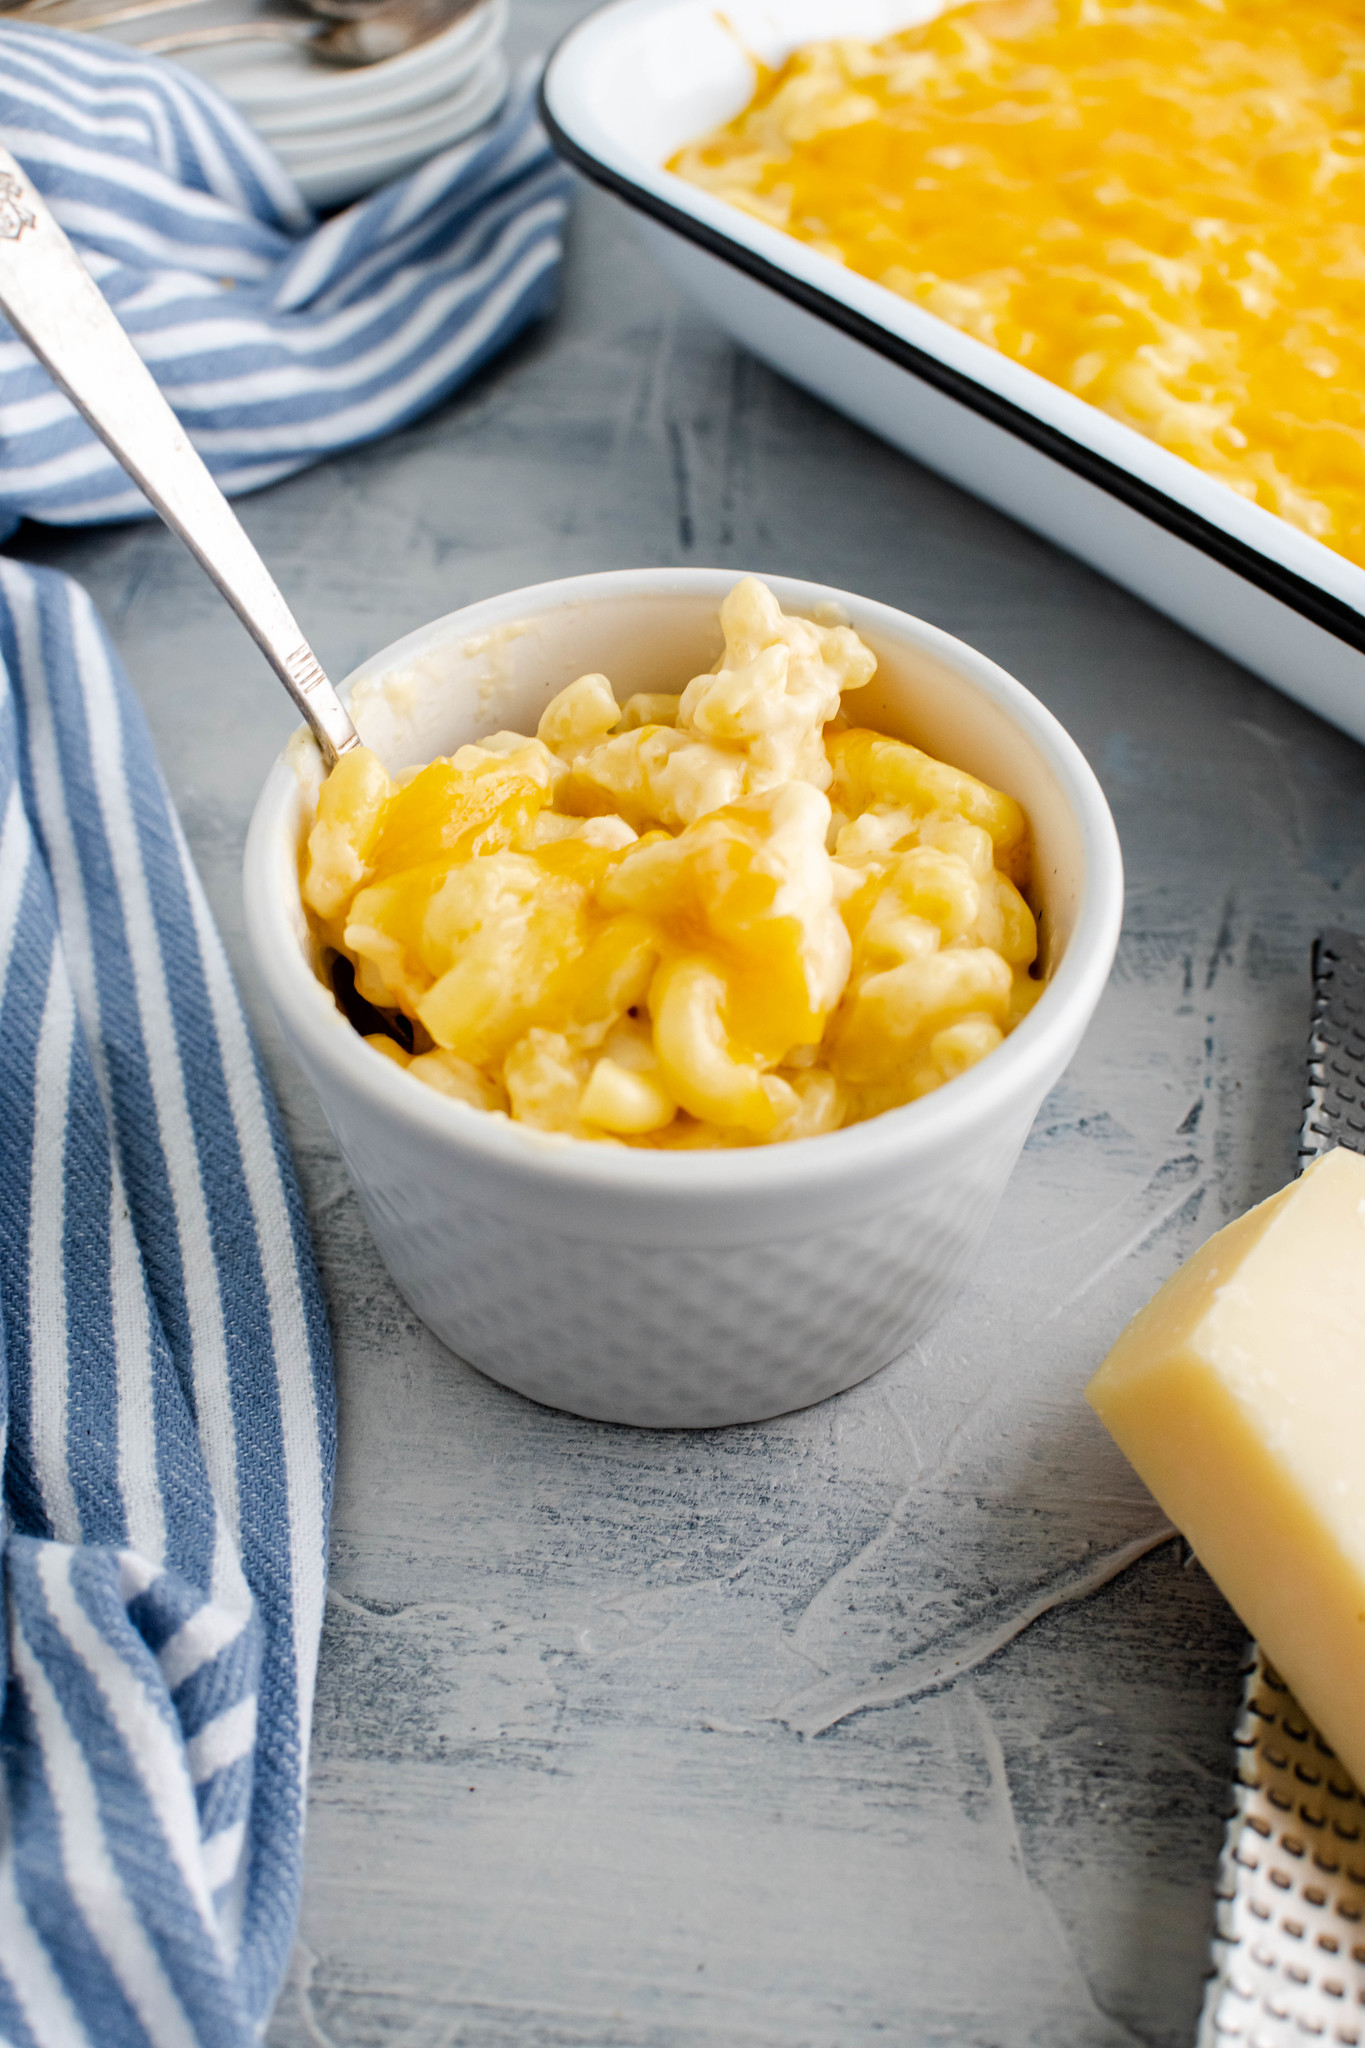 Pale grey bowl filled with macaroni and cheese with a baking dish of macaroni and cheese in the background.